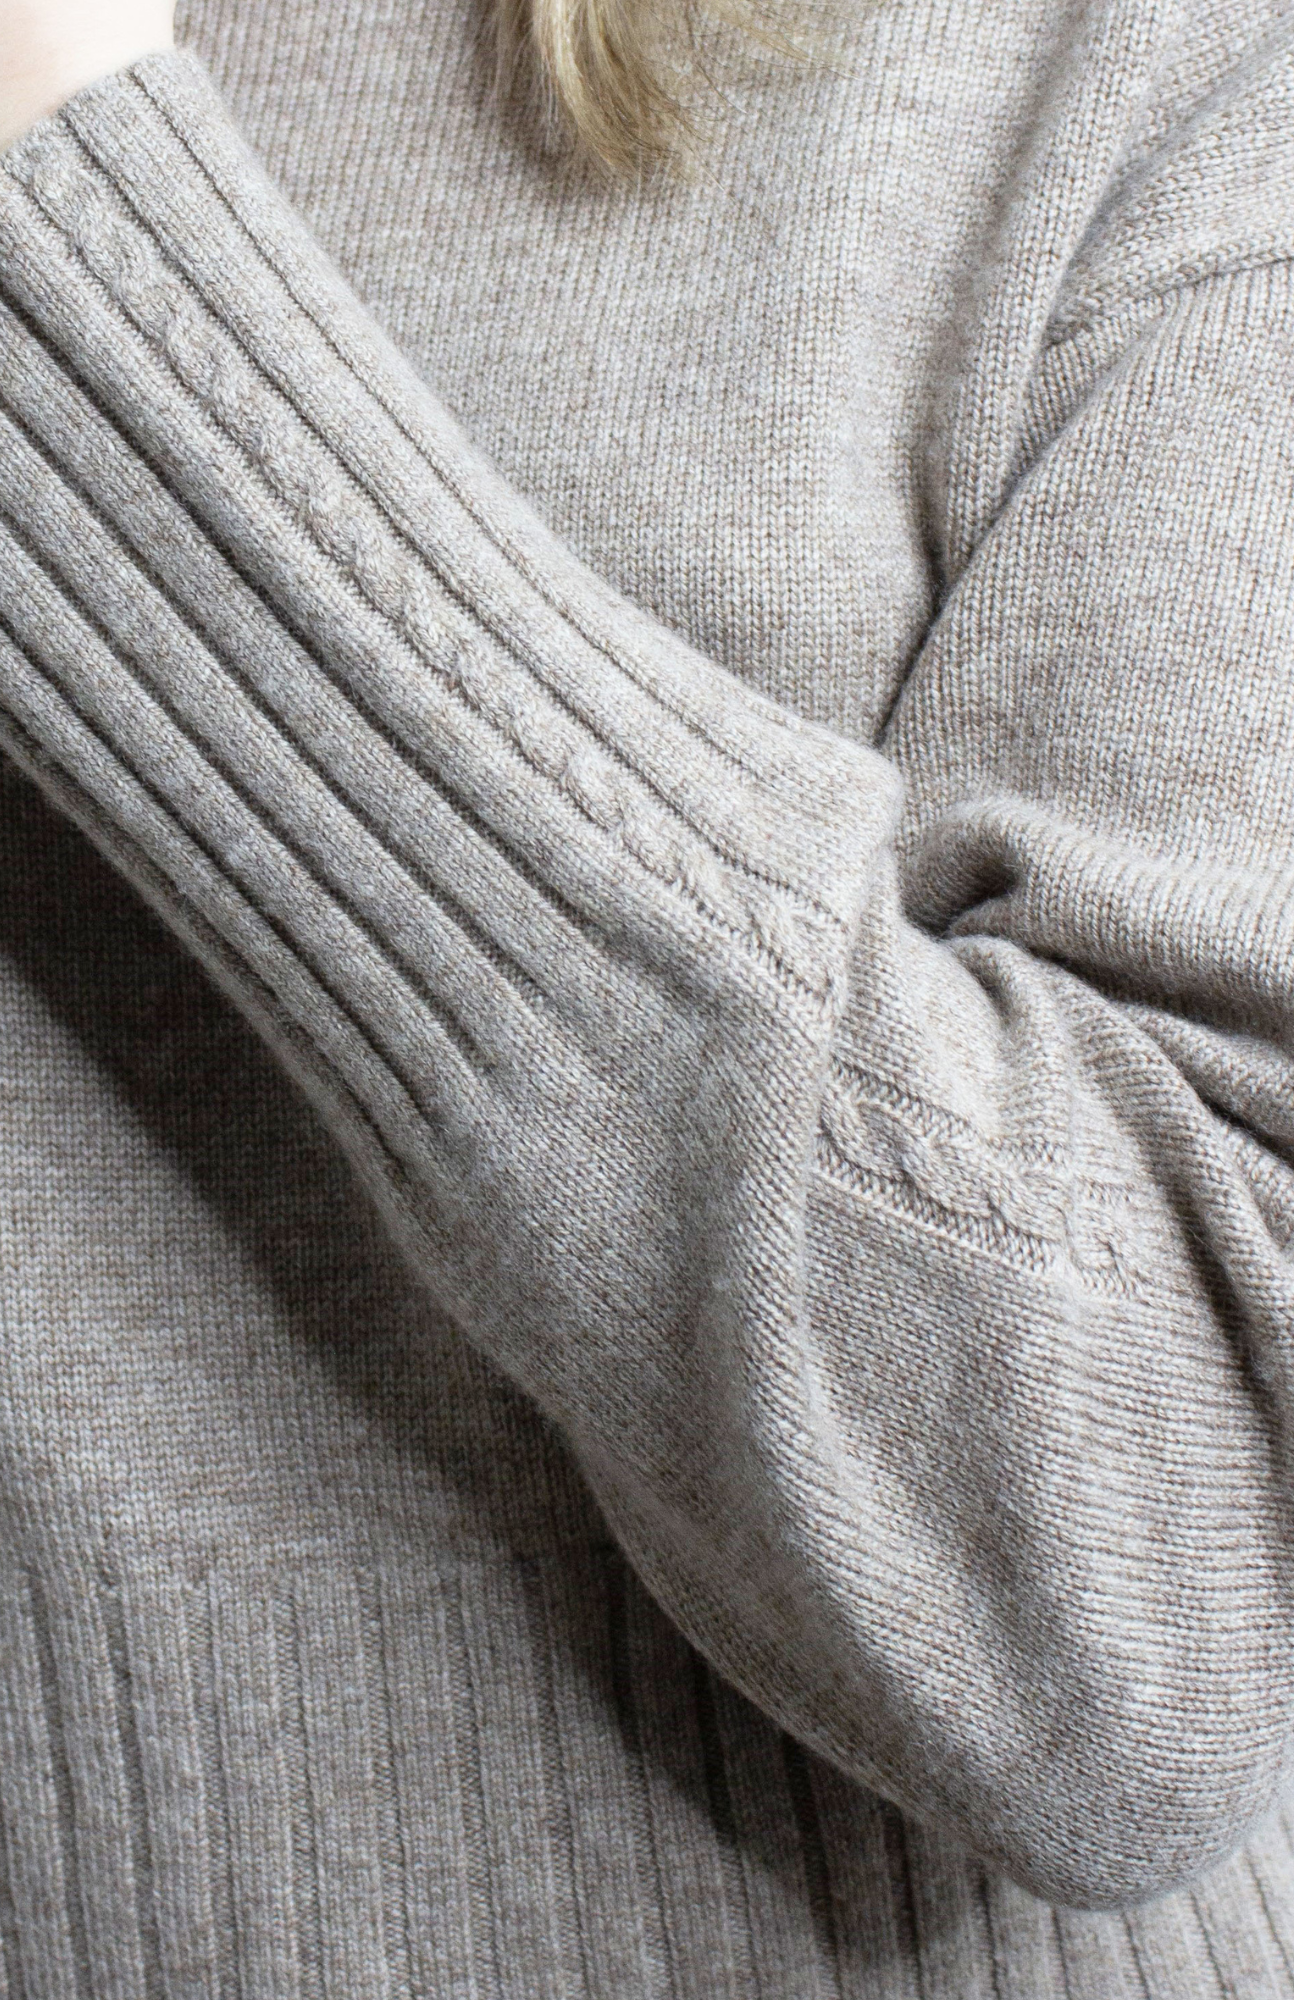 A close-up of the LILYSILK braided collar wool and cashmere blend sweater in camel color.